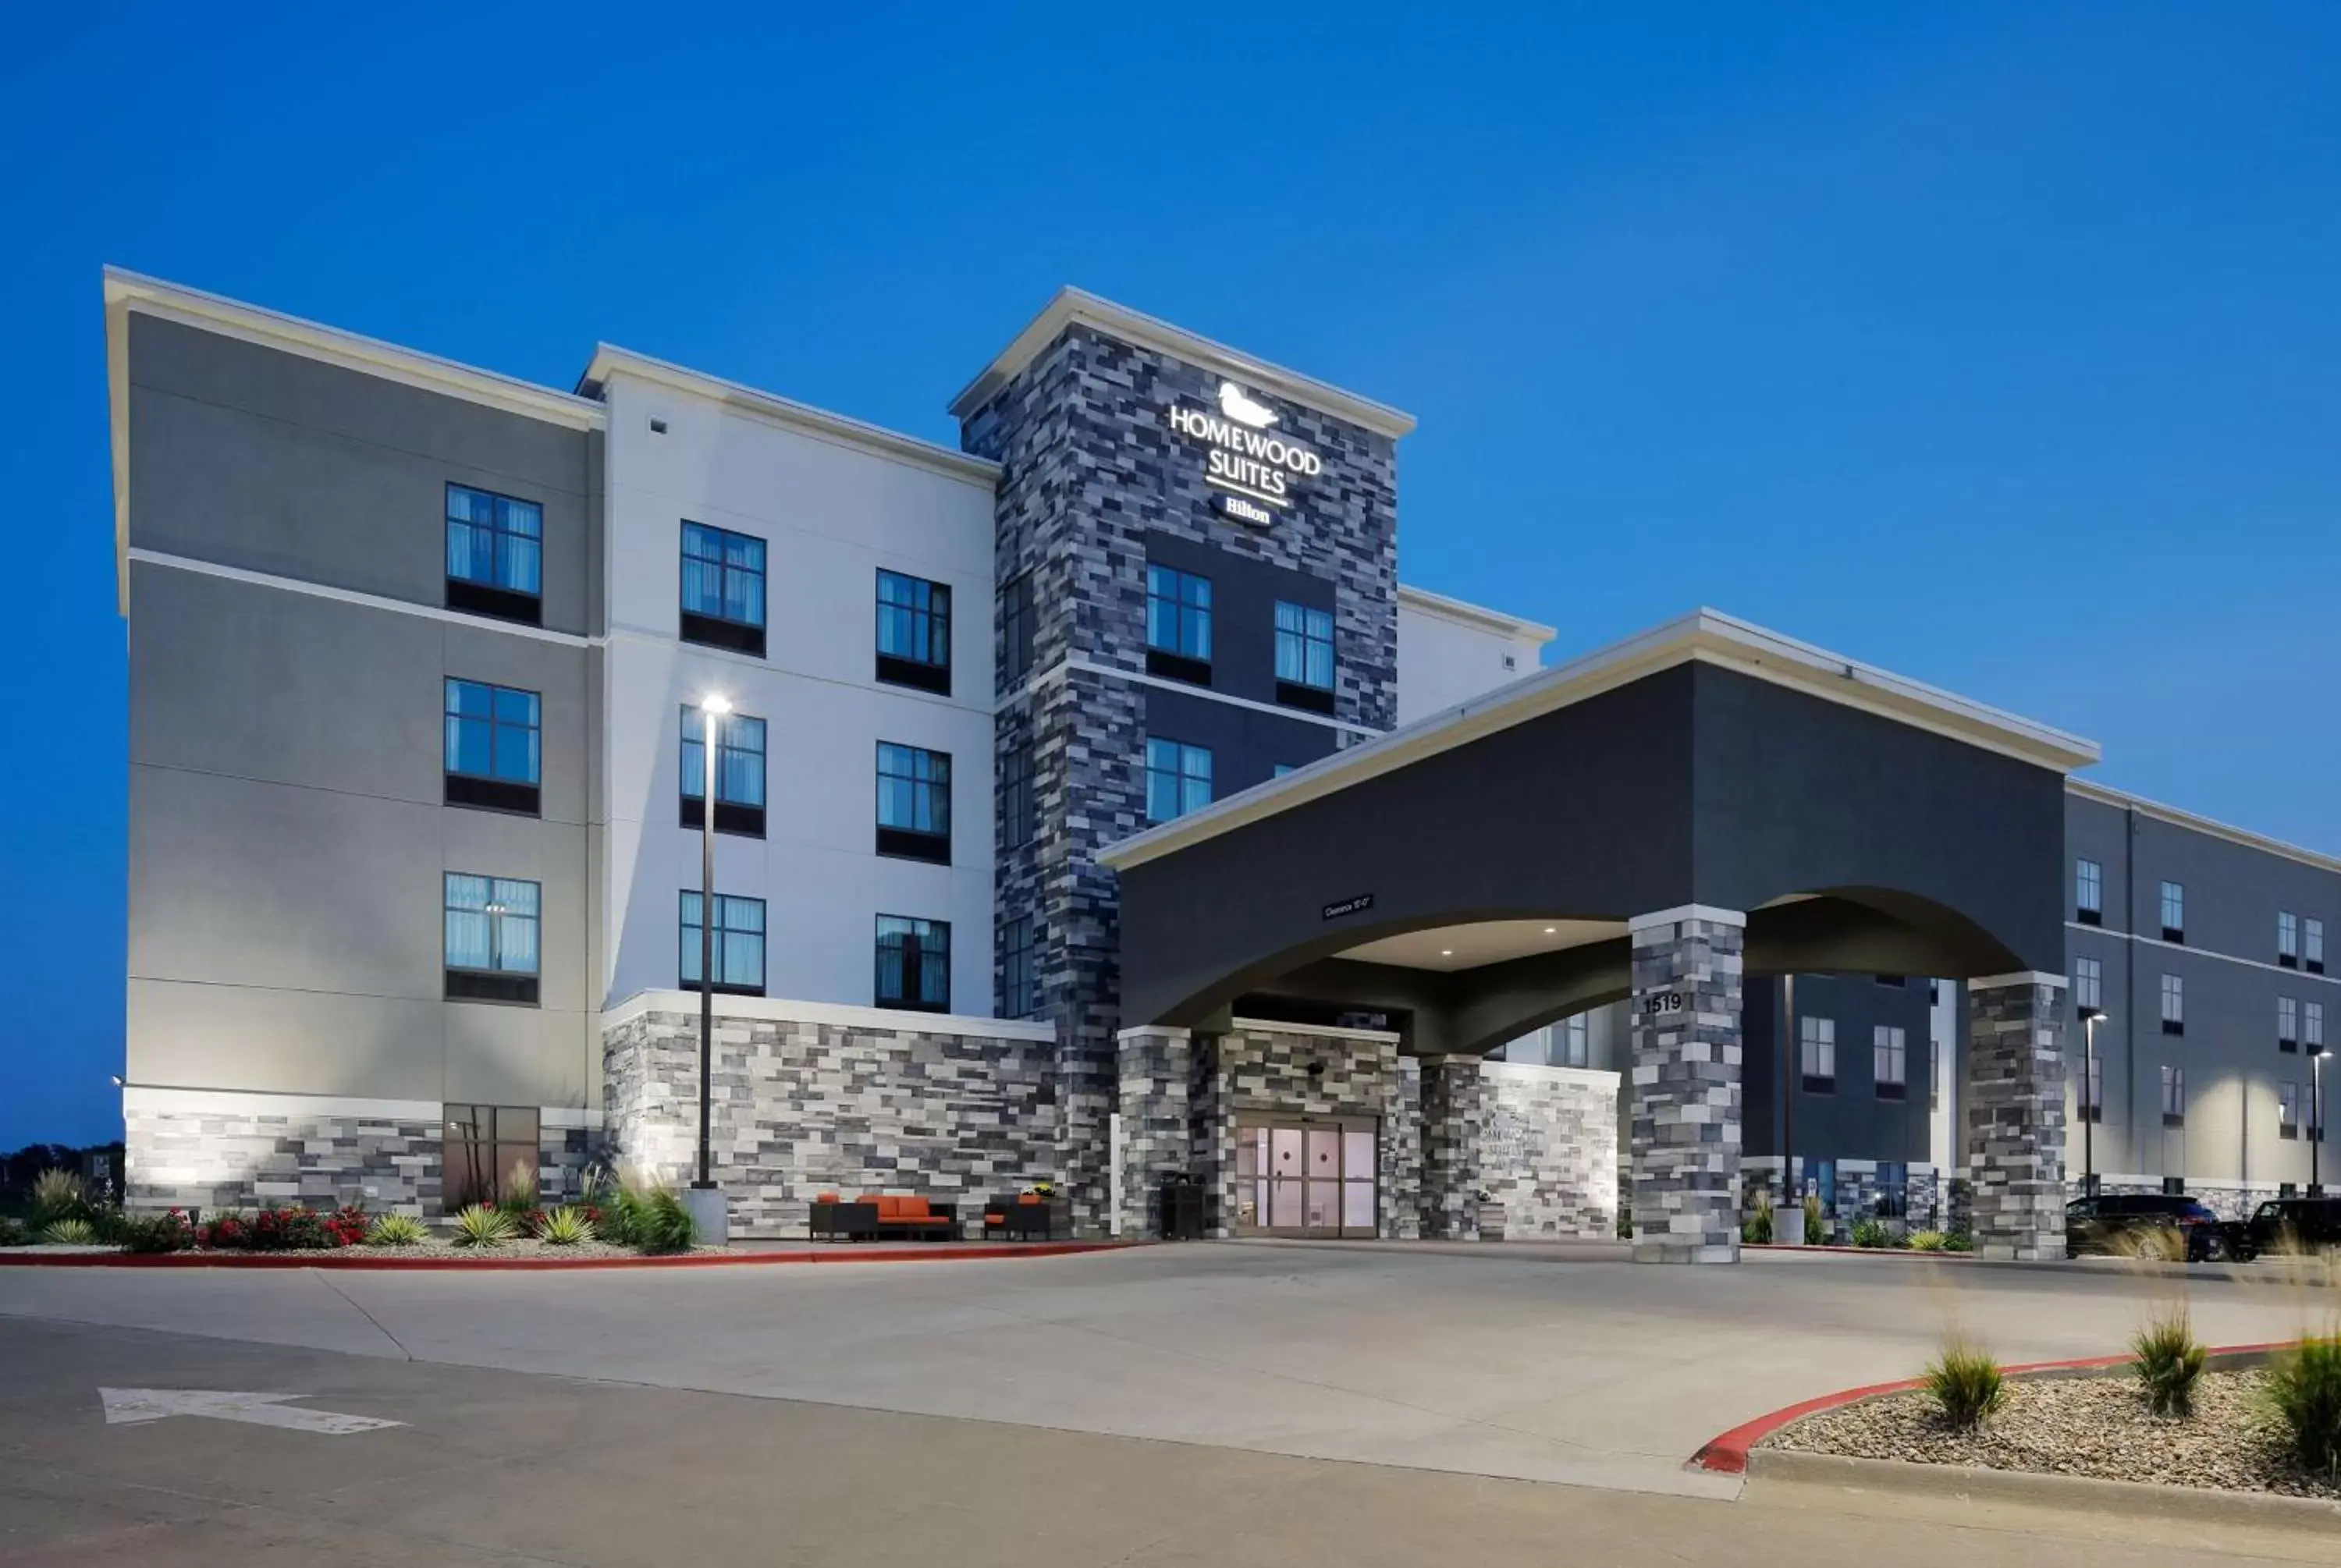 Property Building in Homewood Suites By Hilton Topeka